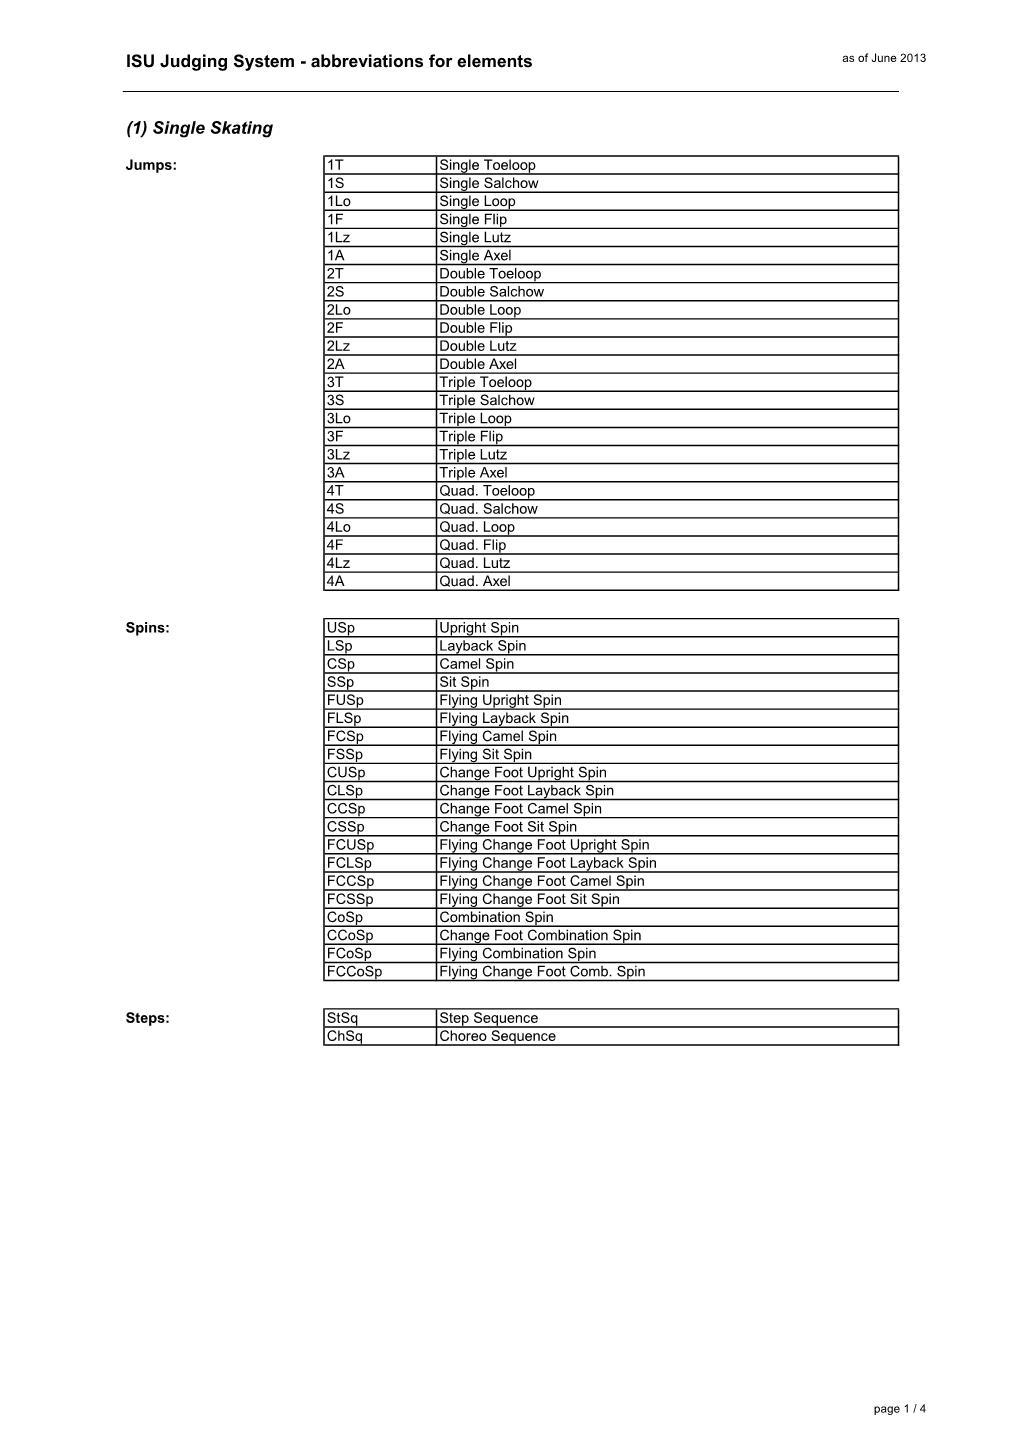 ISU Judging System - Abbreviations for Elements As of June 2013